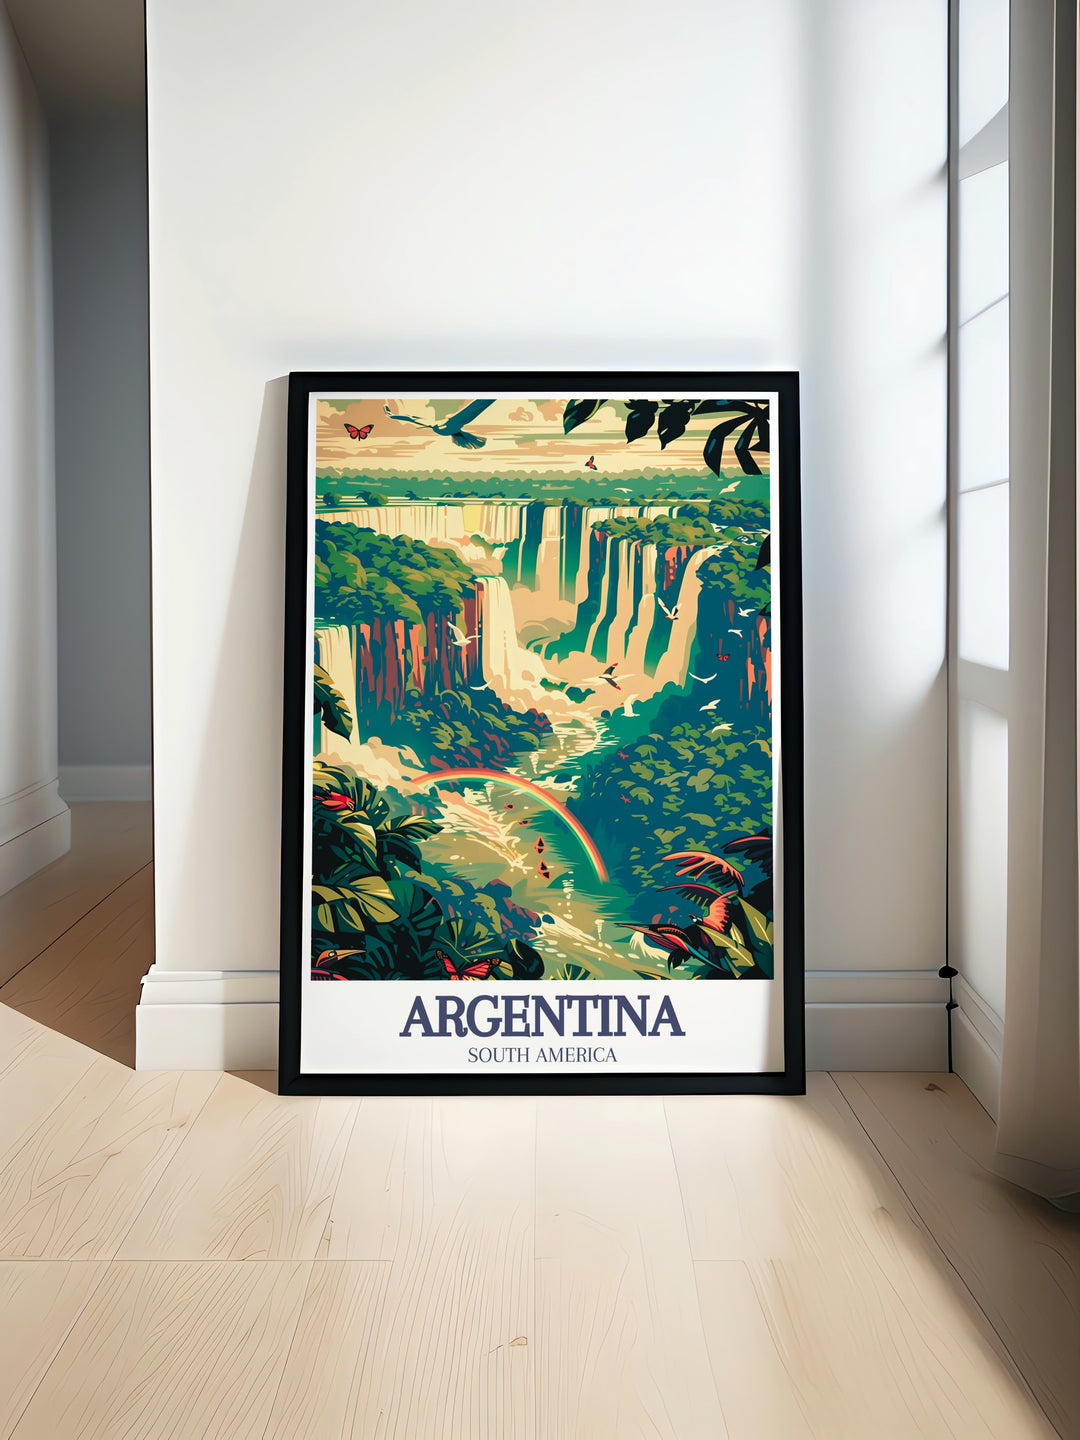 Iguazu Falls, Iguazu River stunning travel poster showcasing the majestic waterfalls and lush greenery. Perfect for adding a touch of natural beauty to your home decor. Ideal for those who appreciate Argentina art and breathtaking landscapes.